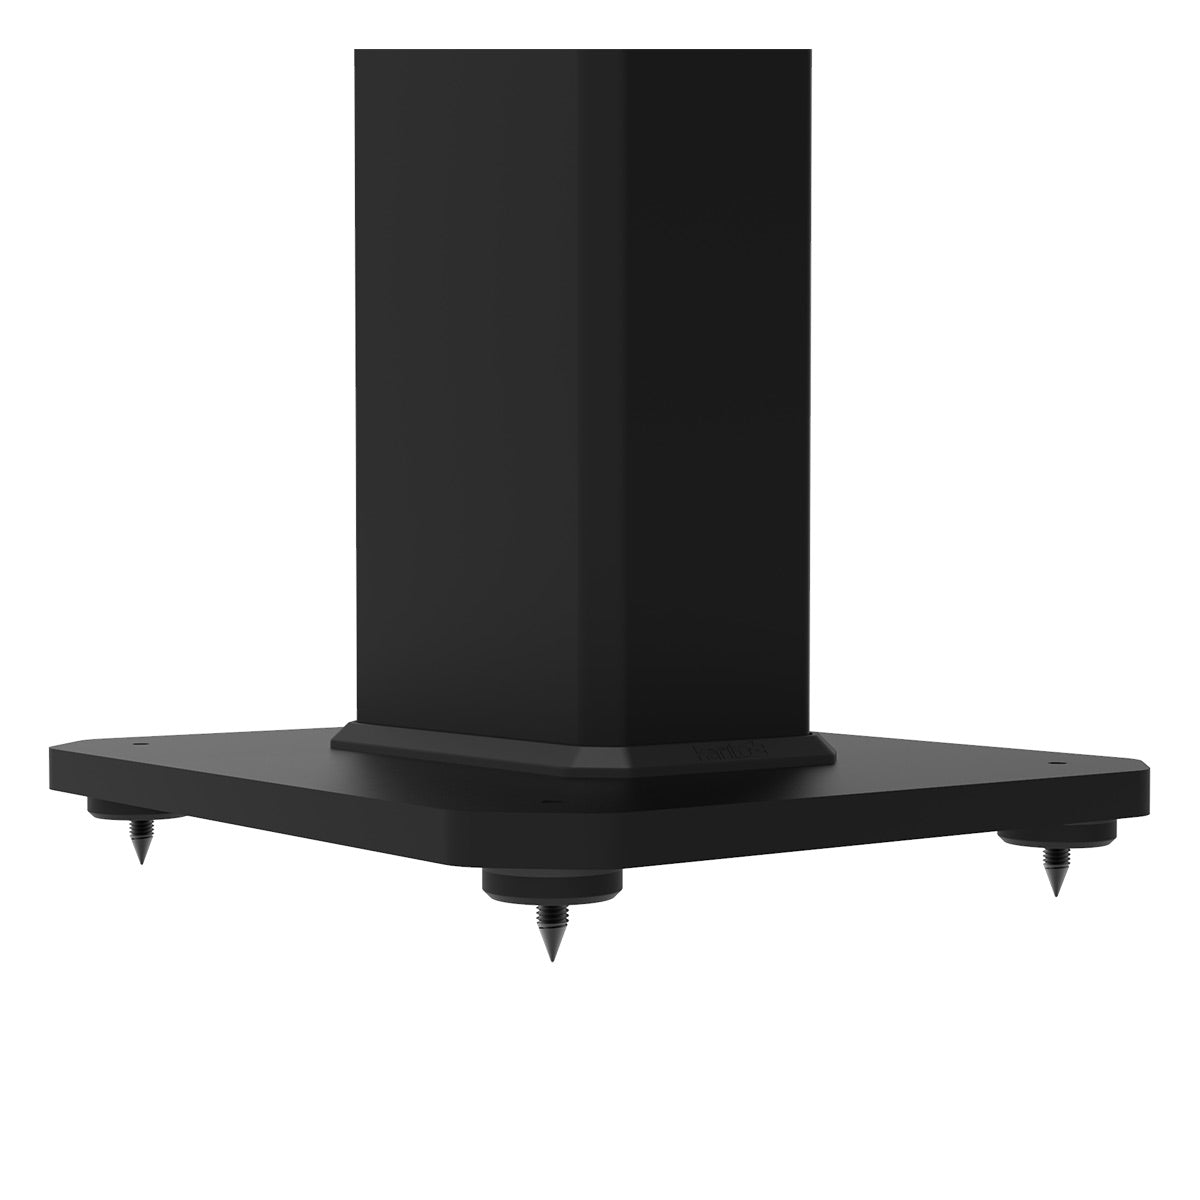 Kanto SX26 26" Tall Fillable Speaker Stands with Isolation Feet - Pair (Black)